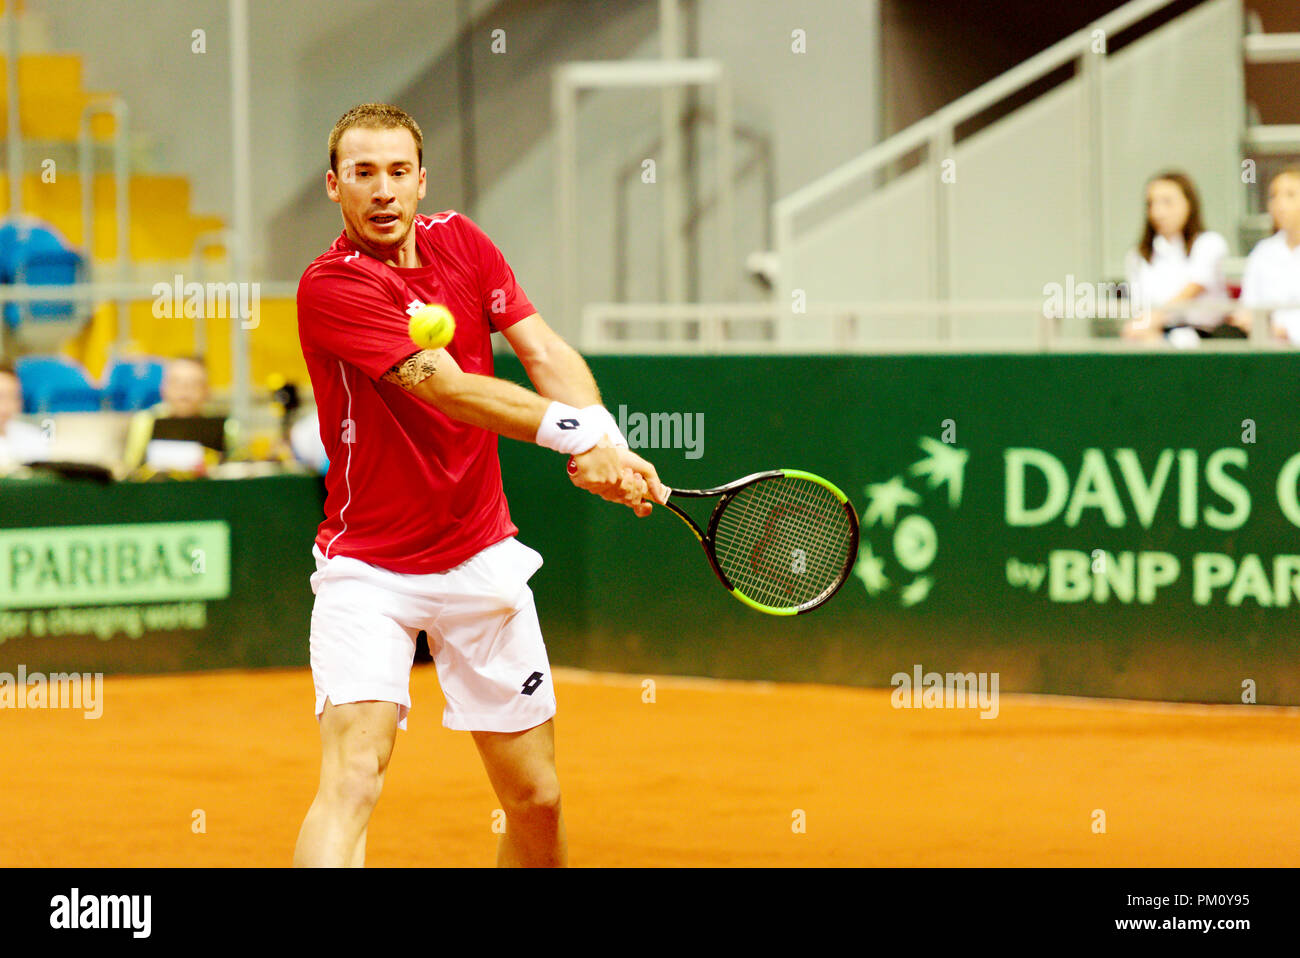 Kraljevo, Serbia. 16th September 2018. Pedja Krstin of Serbia in action in  the first reverse singles match of the Davis Cup 2018 Tennis World Group  Play-off Round at Sportski Center Ibar in